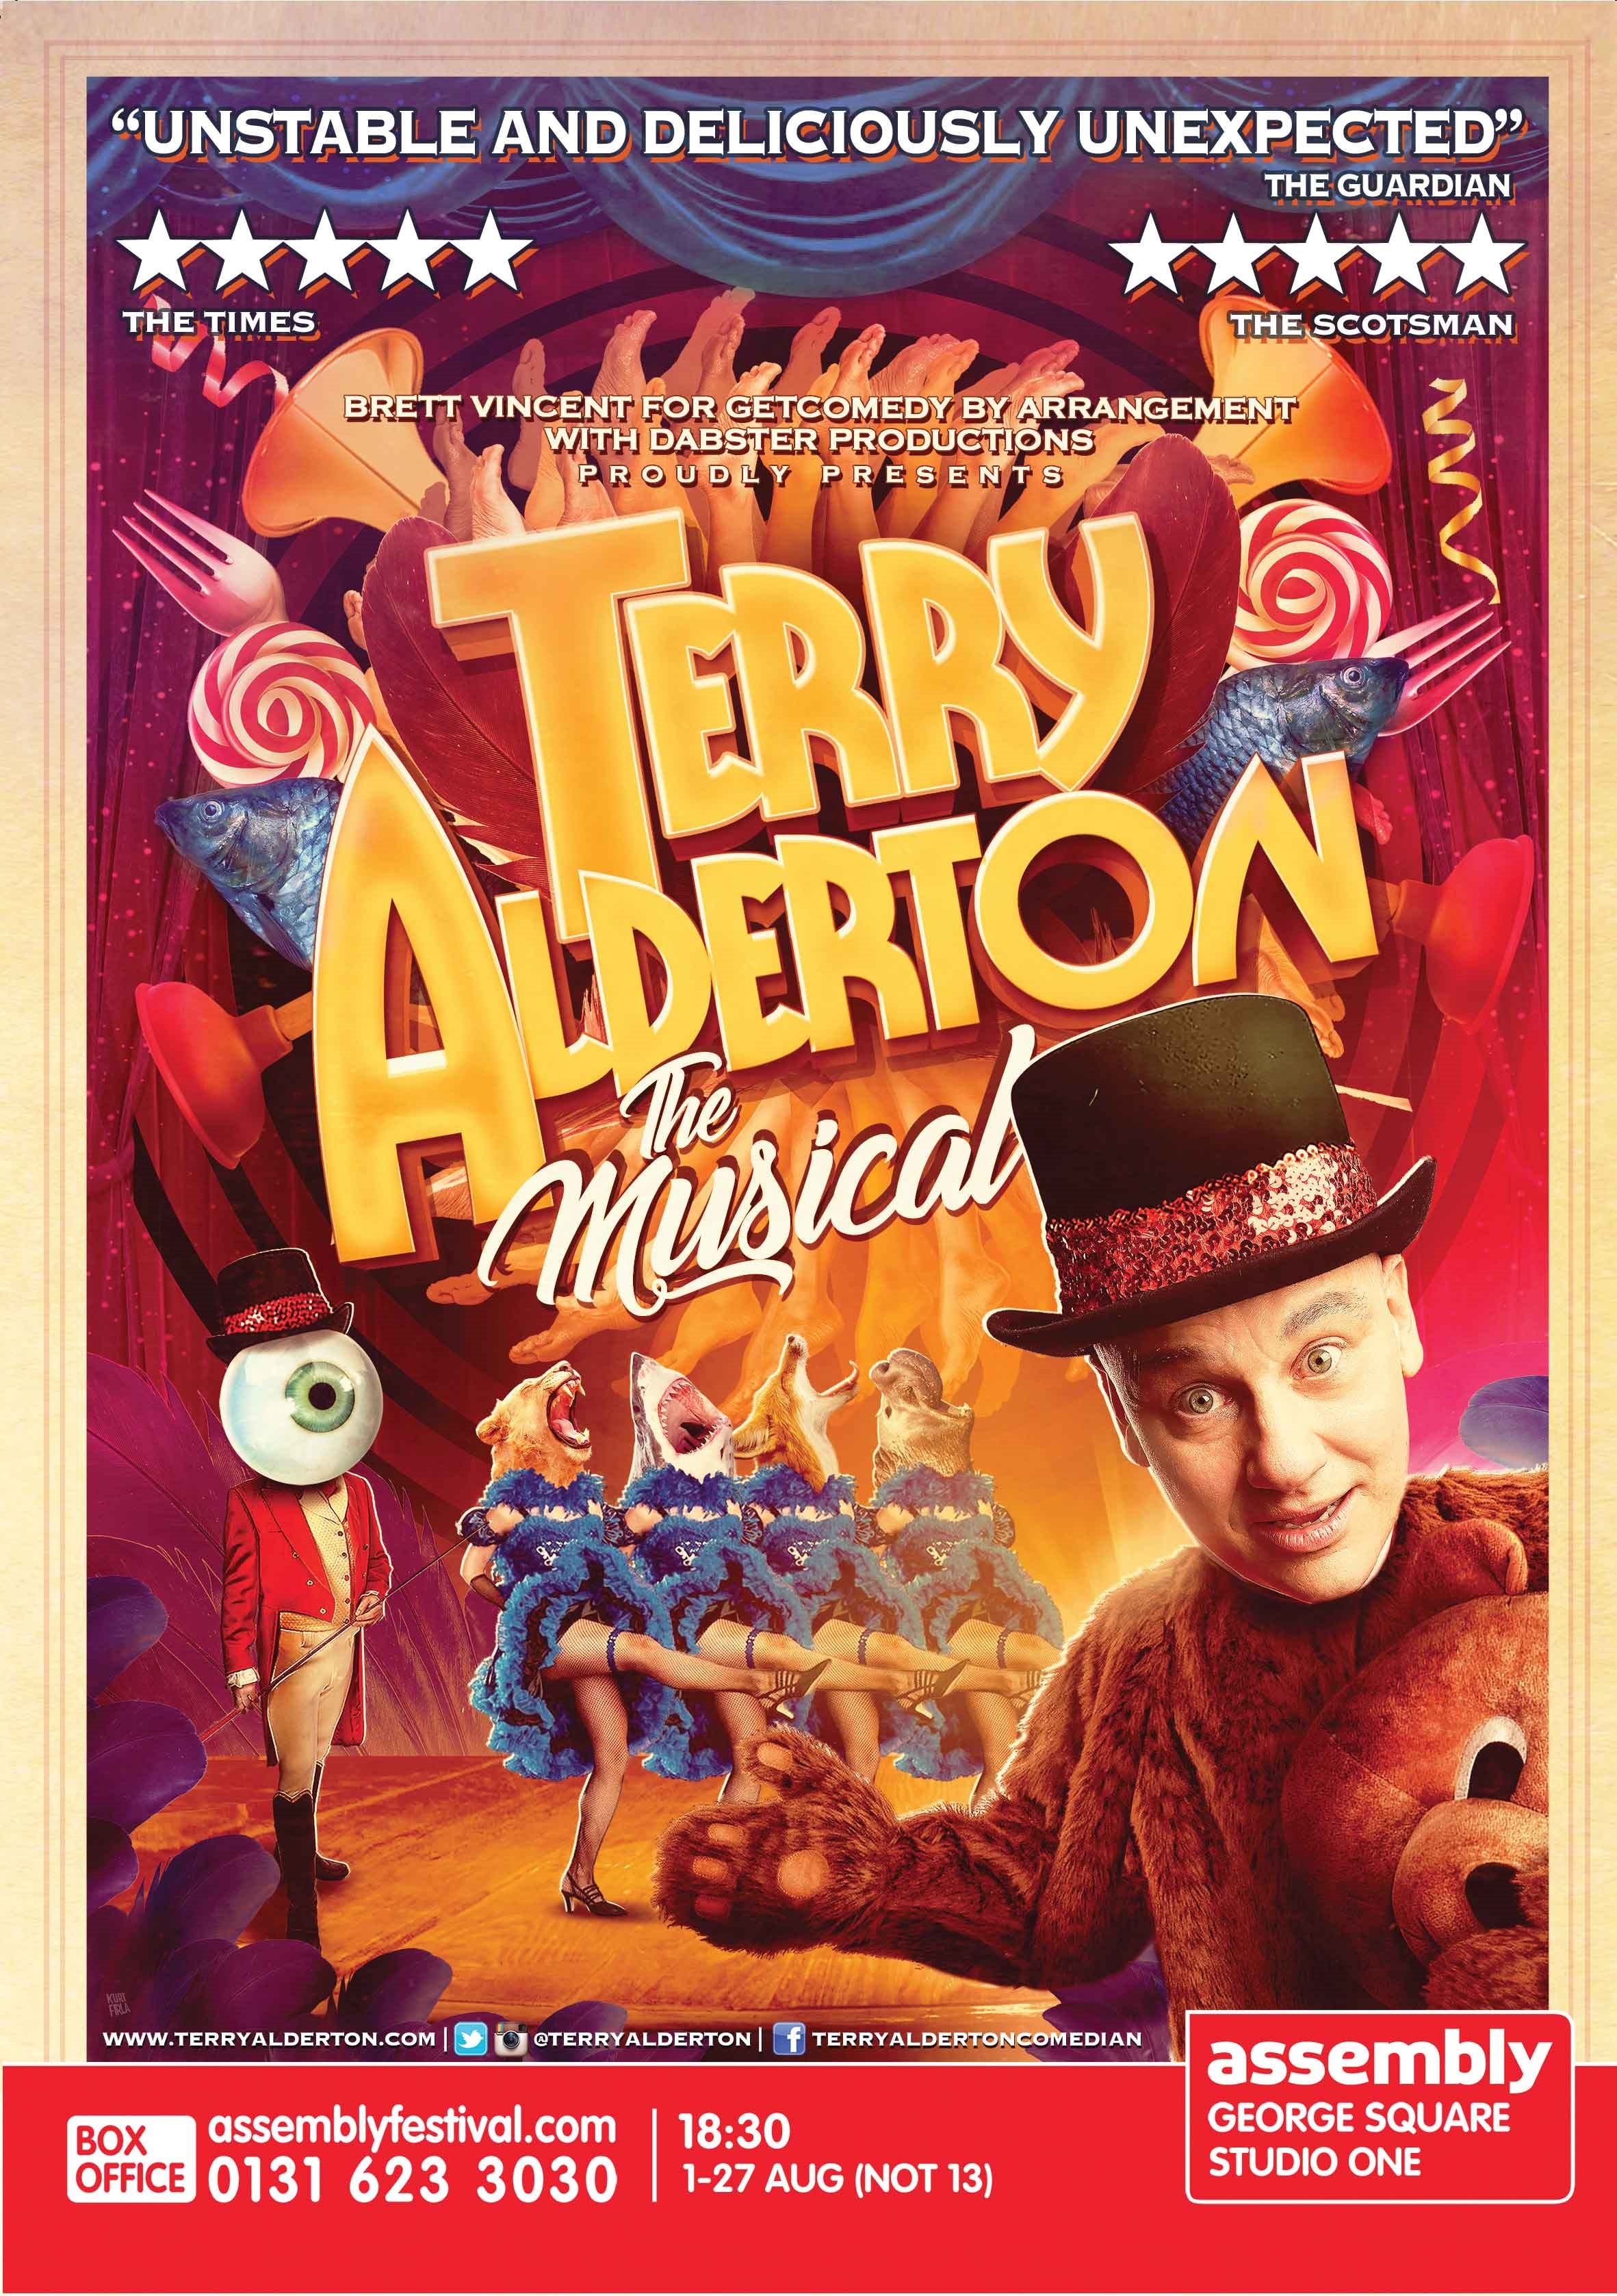 The poster for Terry Alderton: The Musical